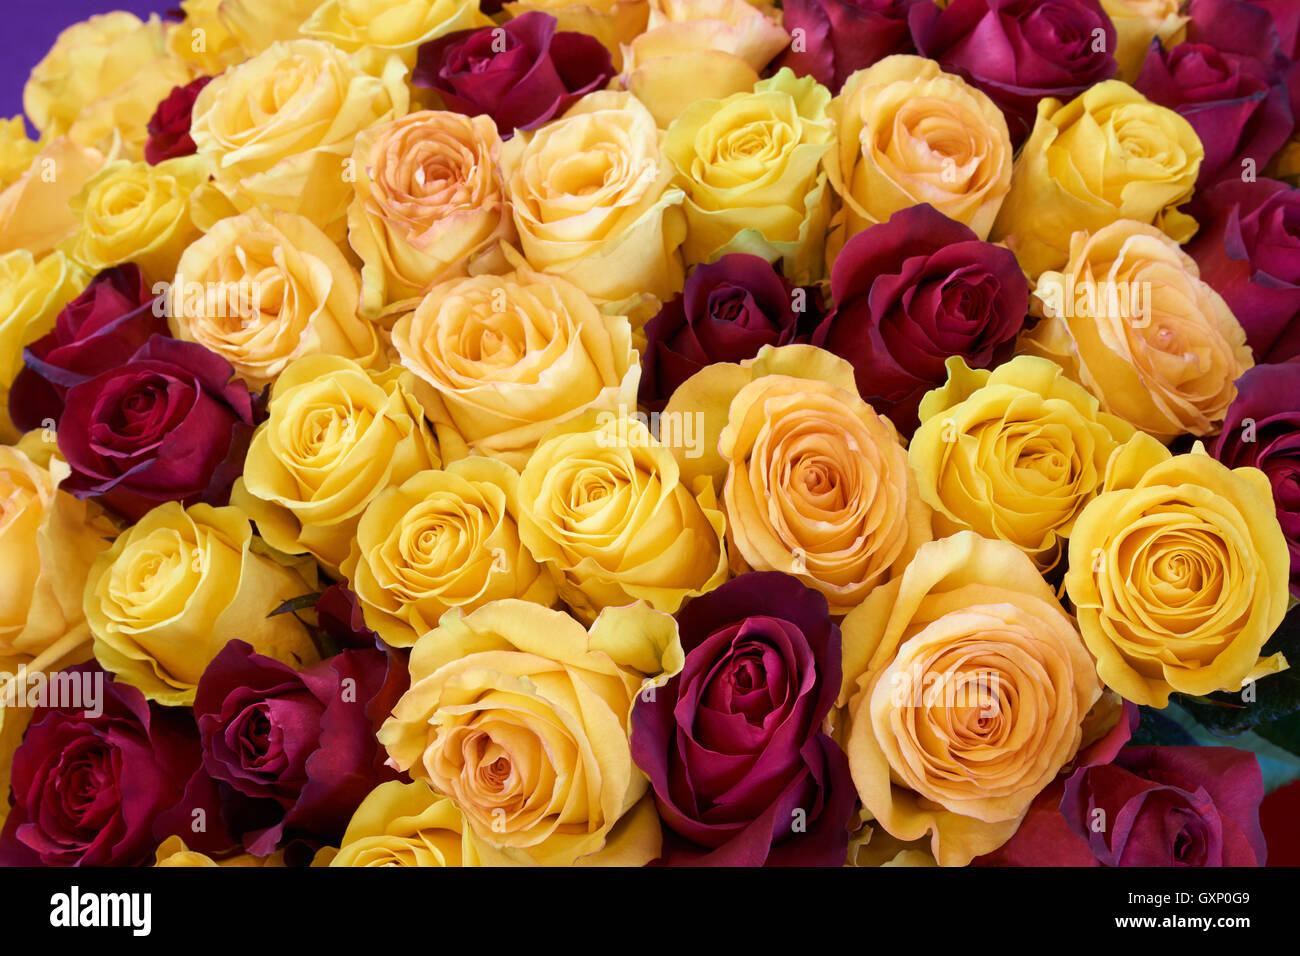 Bunch of yellow and wine red roses as floral background Stock Photo